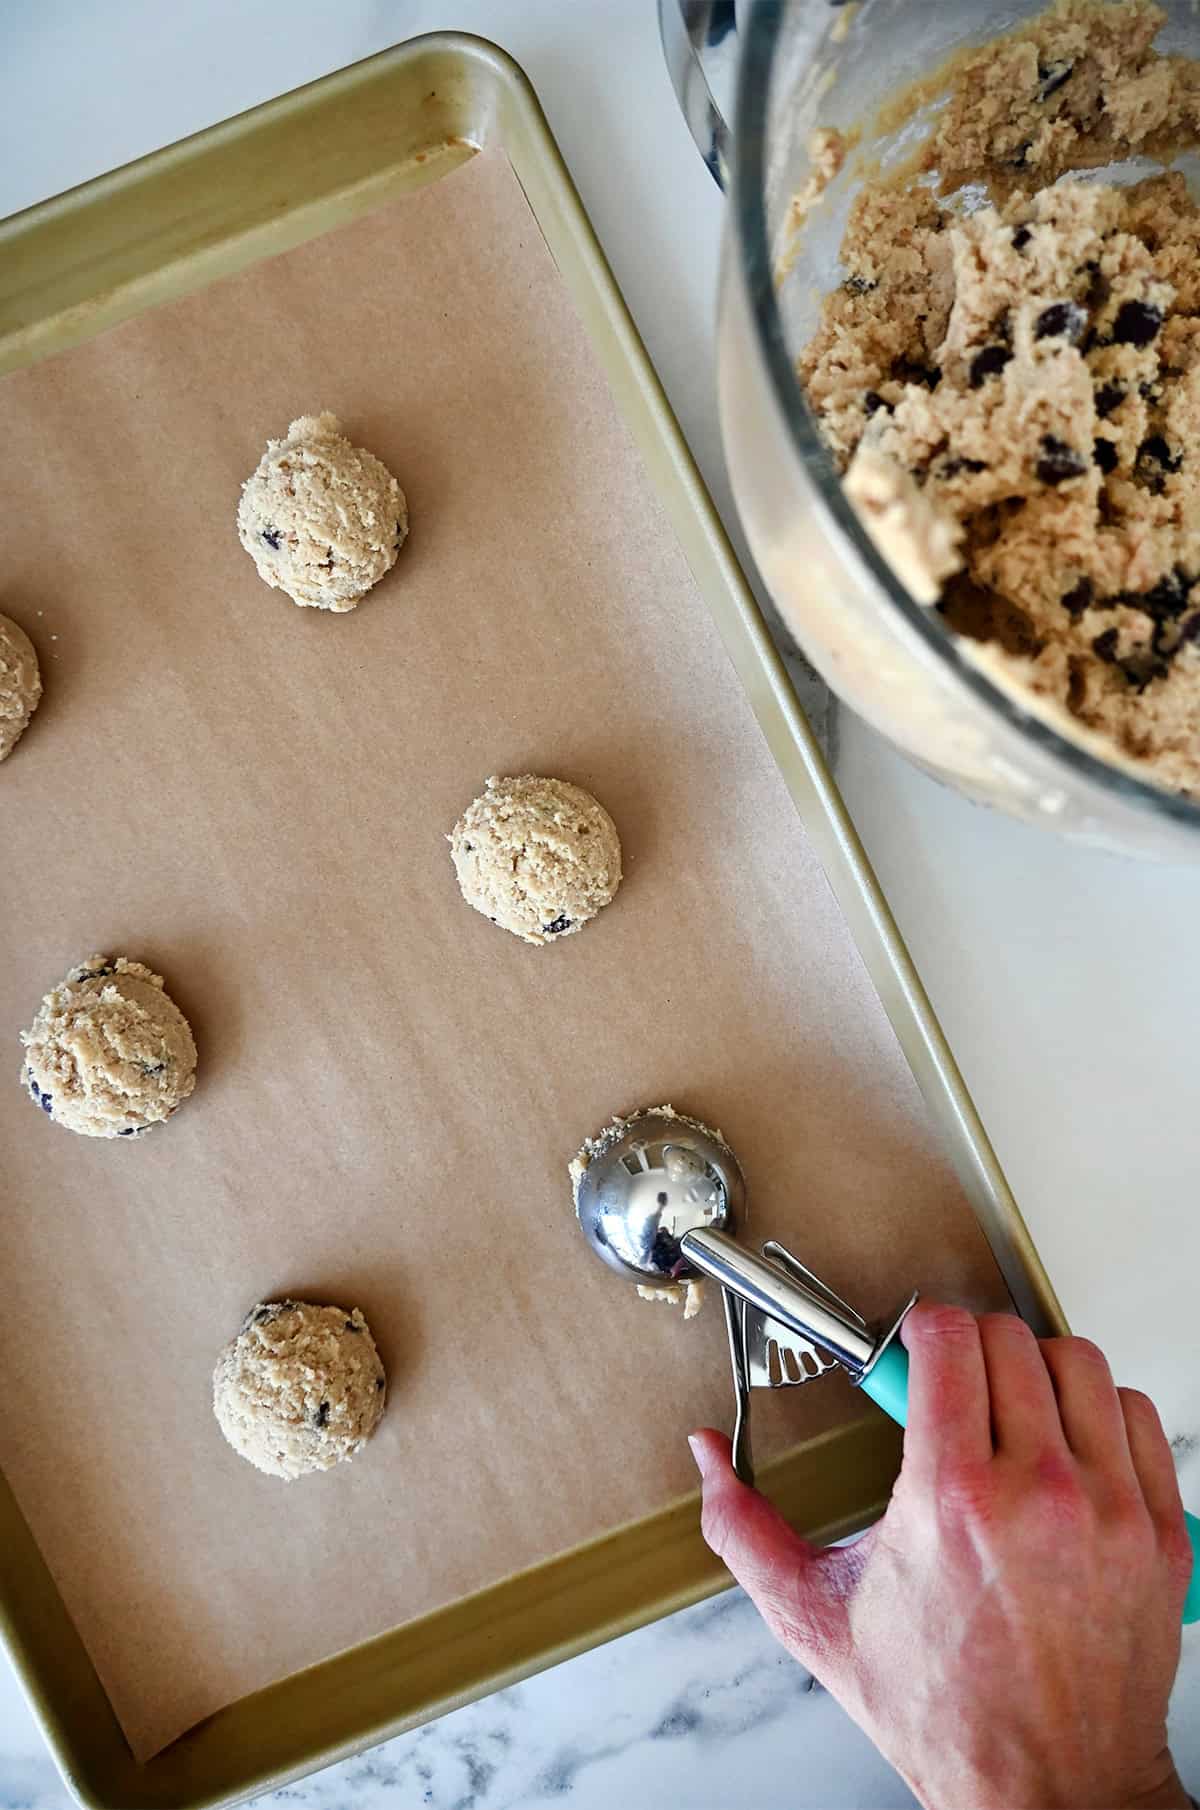 A hand holding a small cookie scoop adds mounds of cookie dough to a parchment paper-lined baking sheet. A bowl containing toffee cookie dough is nearby.